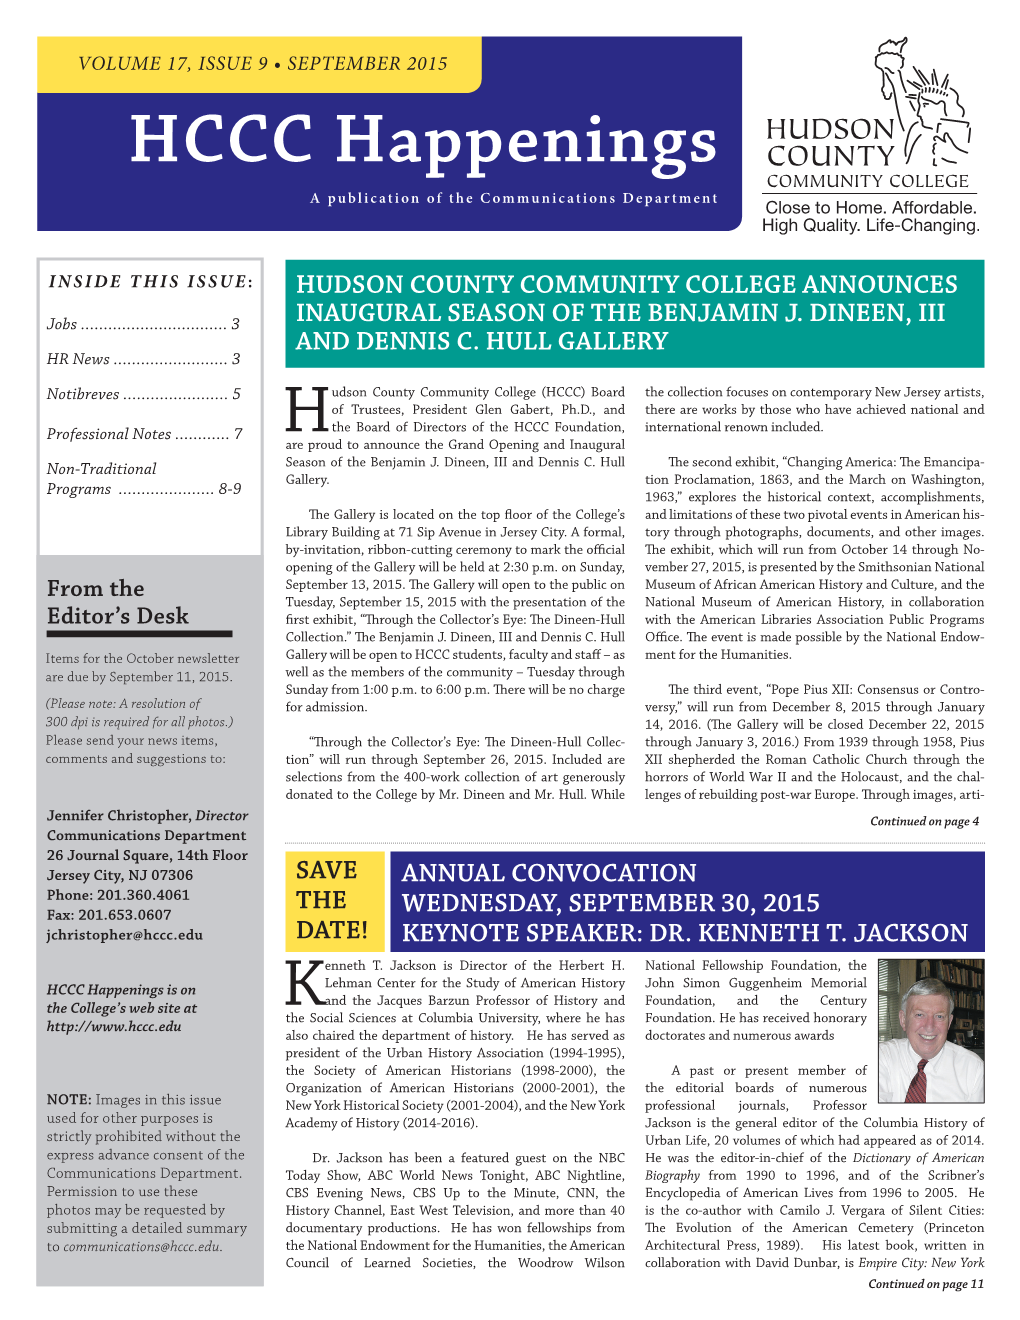 SEPTEMBER 2015 HCCC Happenings a Publication of the Communications Department